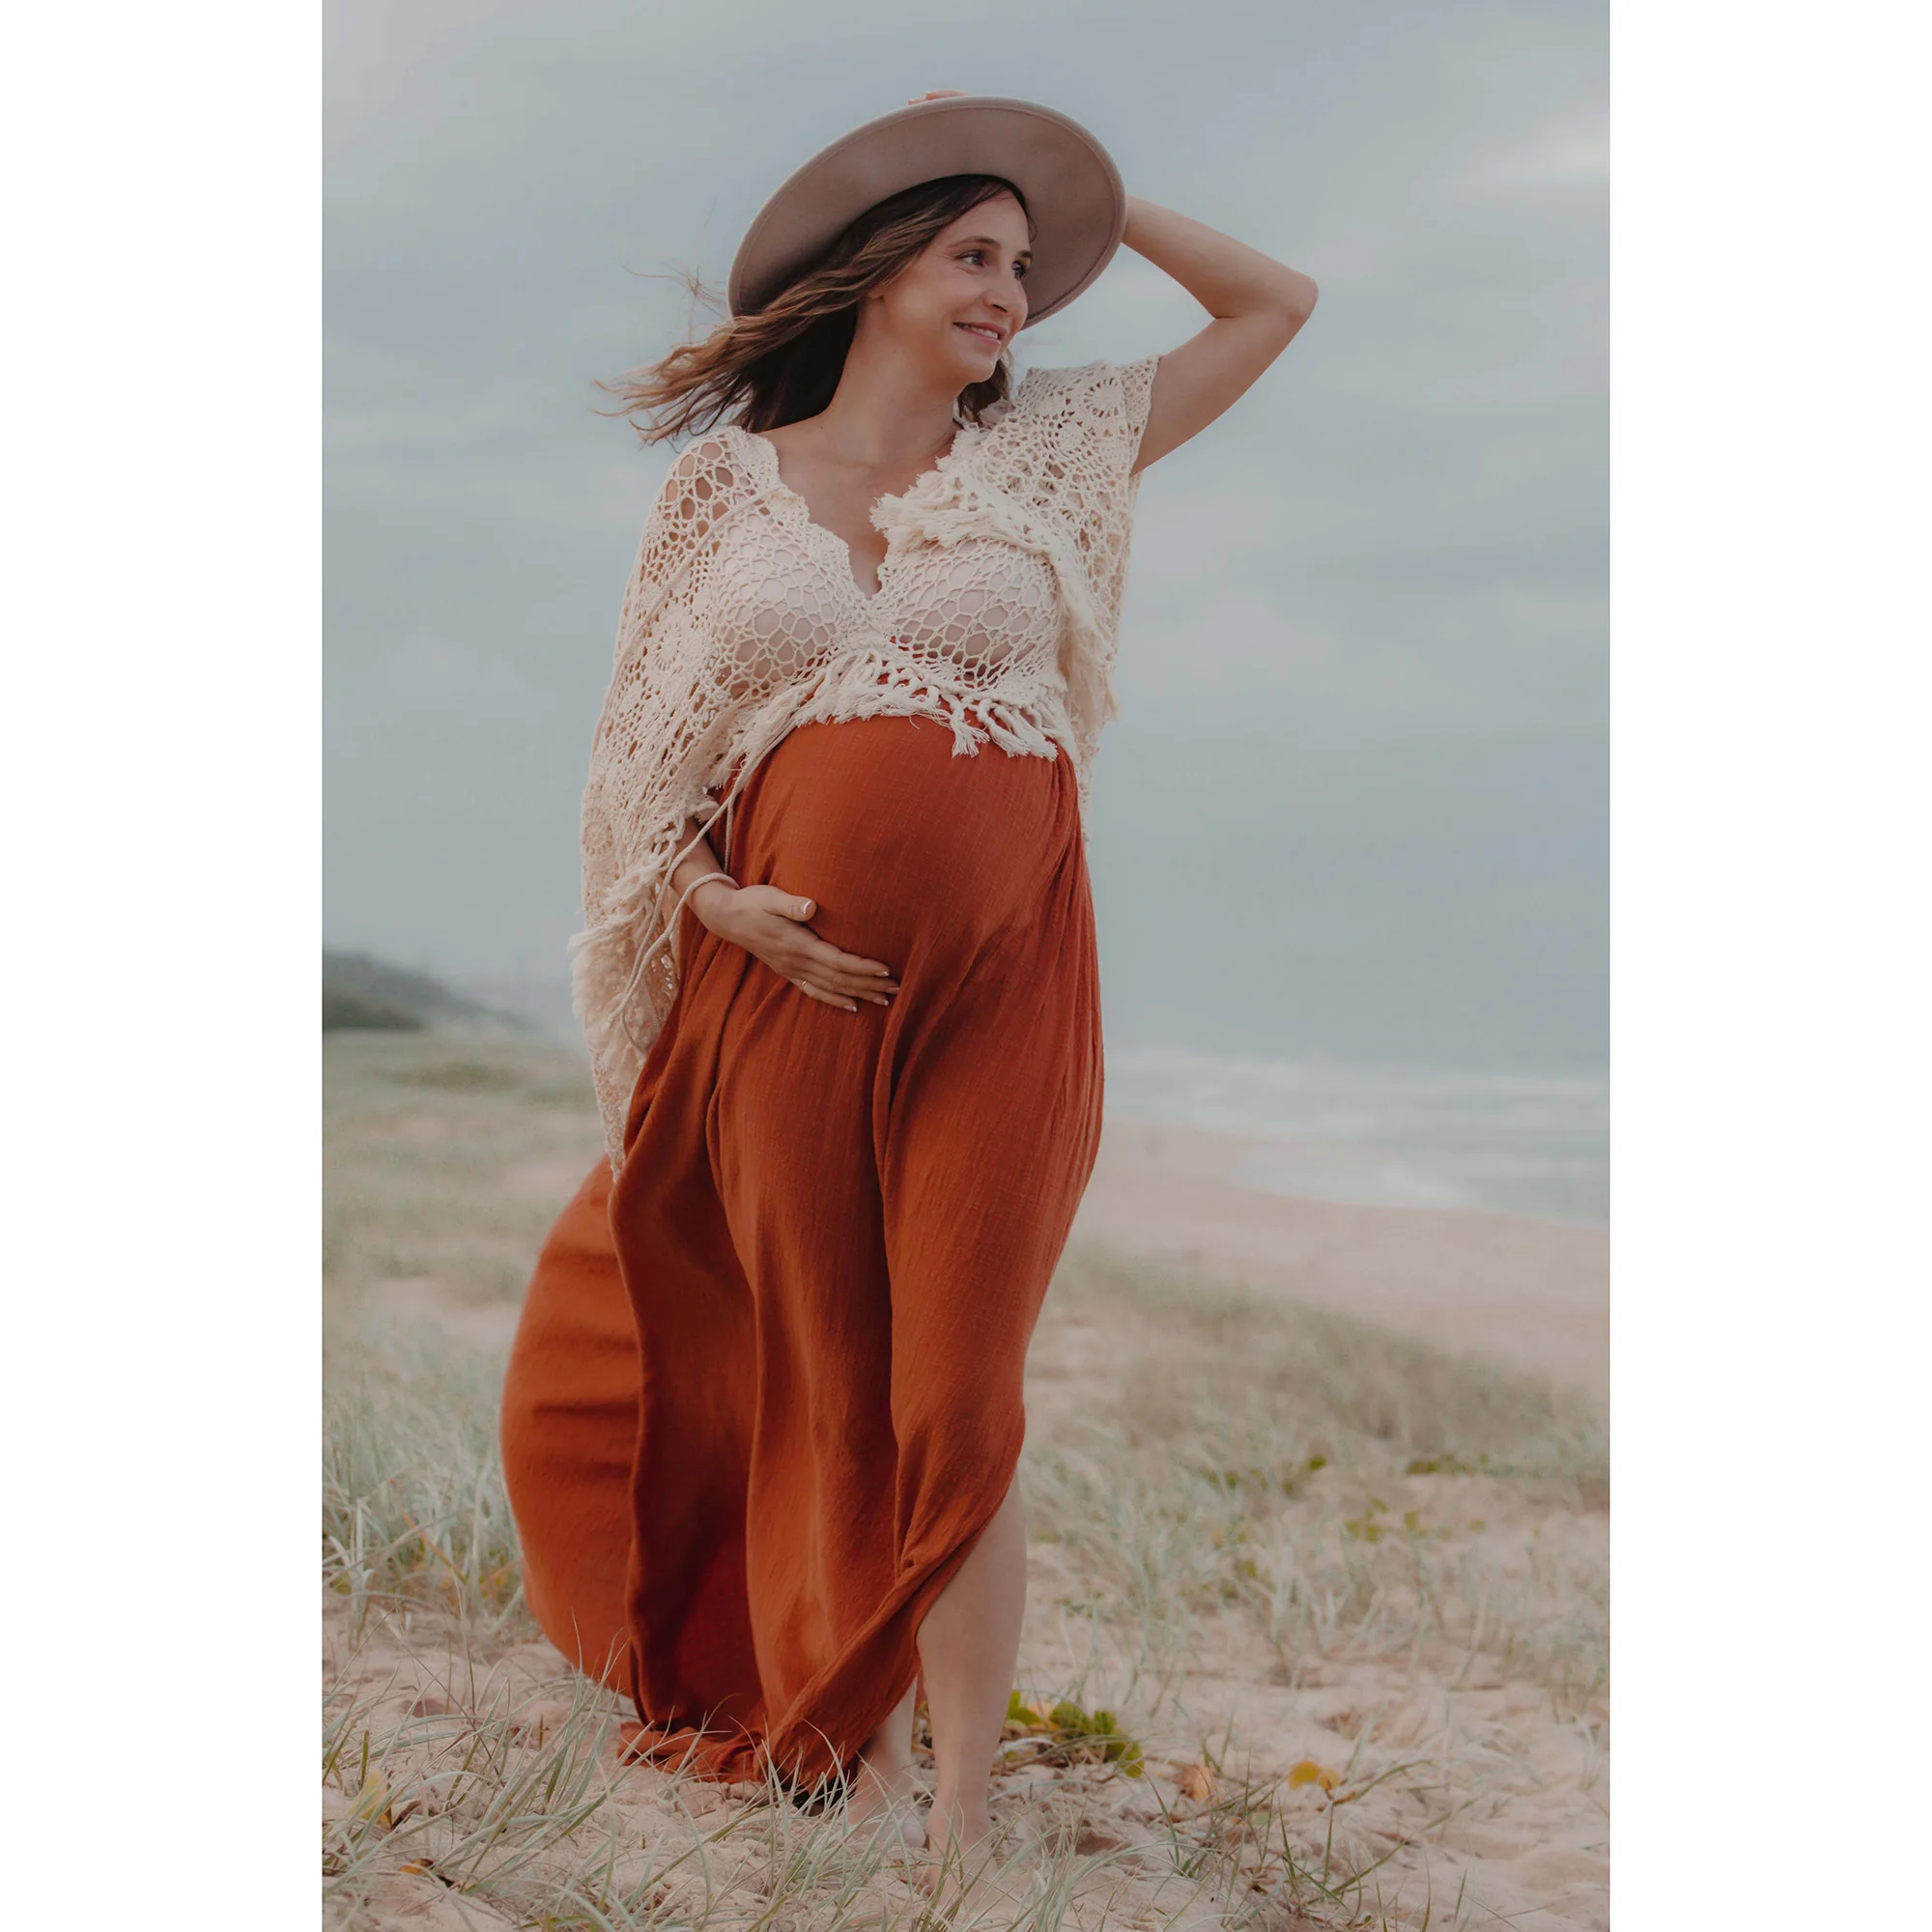 Enlarge Boho Cotton Photo Shoot Pregnant Robe Maternity Dresses with Tassels Evening Party Costume for Women Photography Accessories